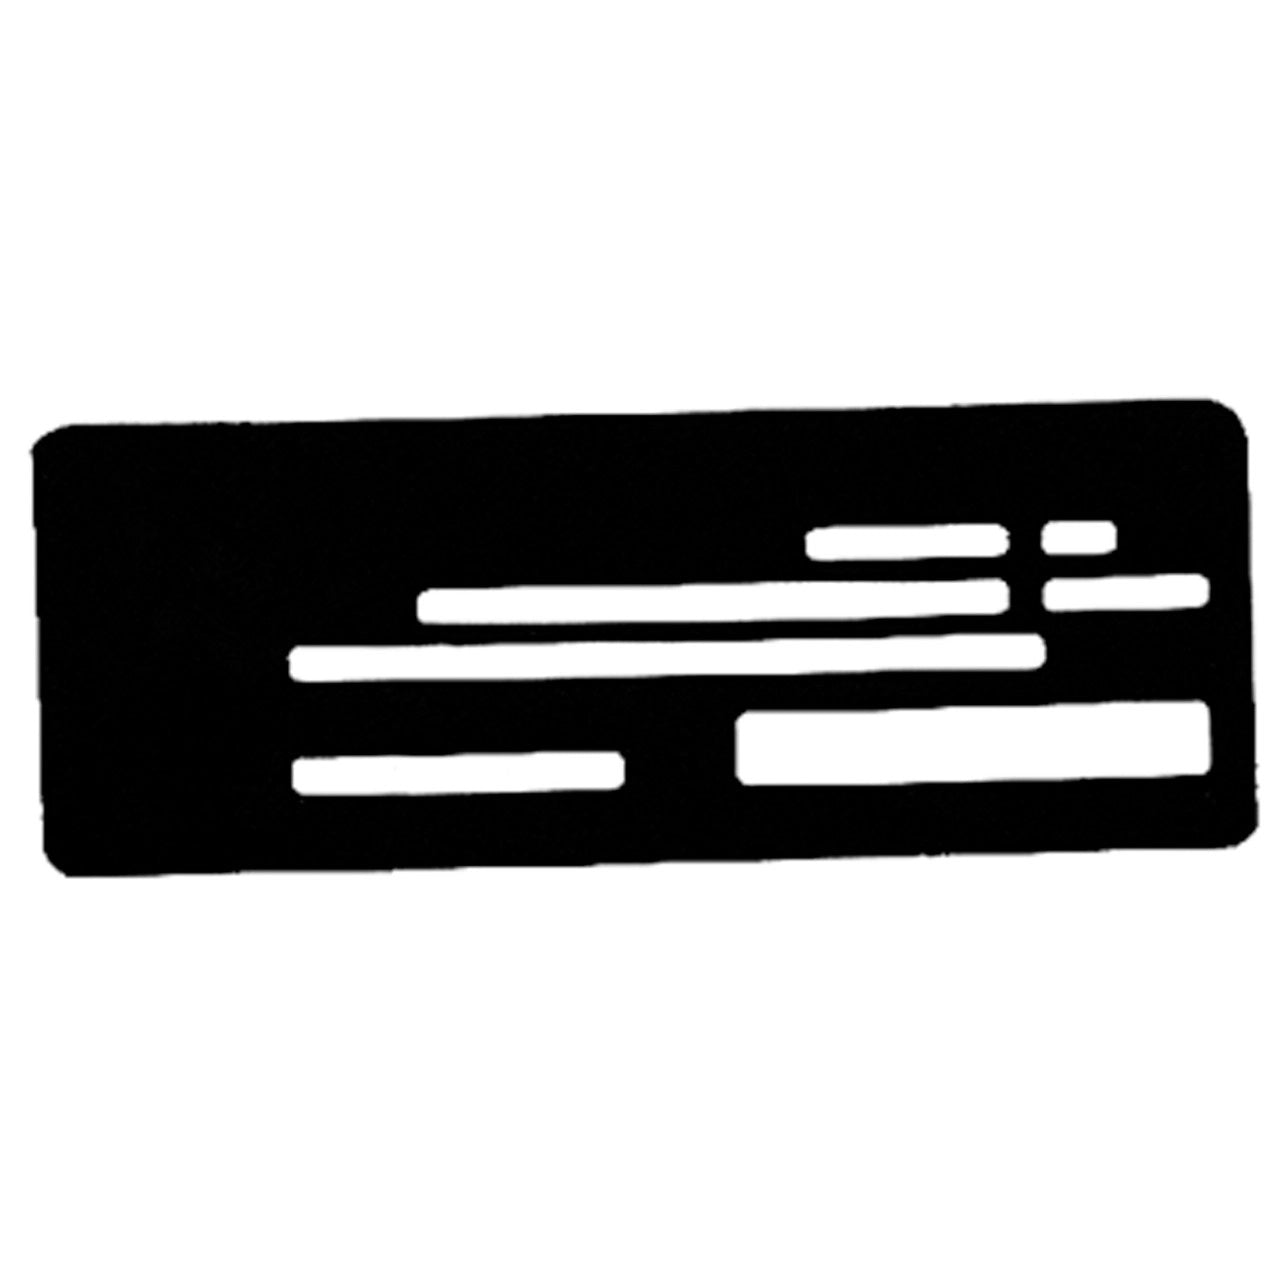 This check writing template fits a business check measuring 3 X 8 inches, and has cutouts for all necessary entries.